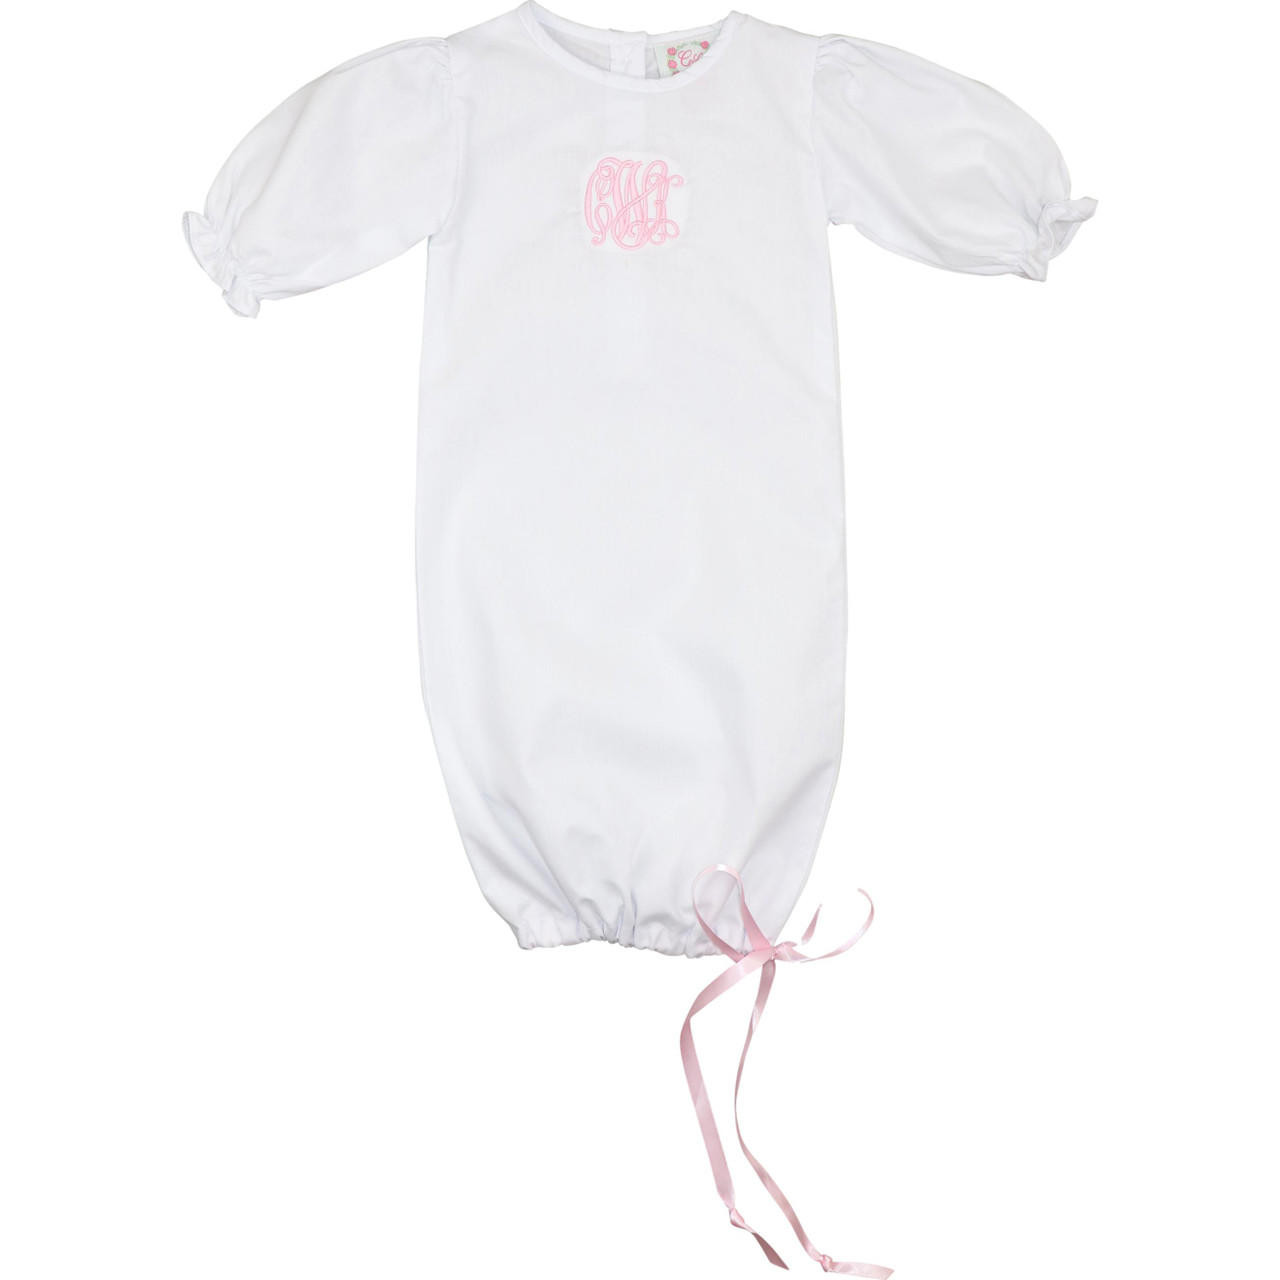 Shop Baby Girl Clothes | Onesies®, Pajamas, Outfit Sets & More – Gerber  Childrenswear